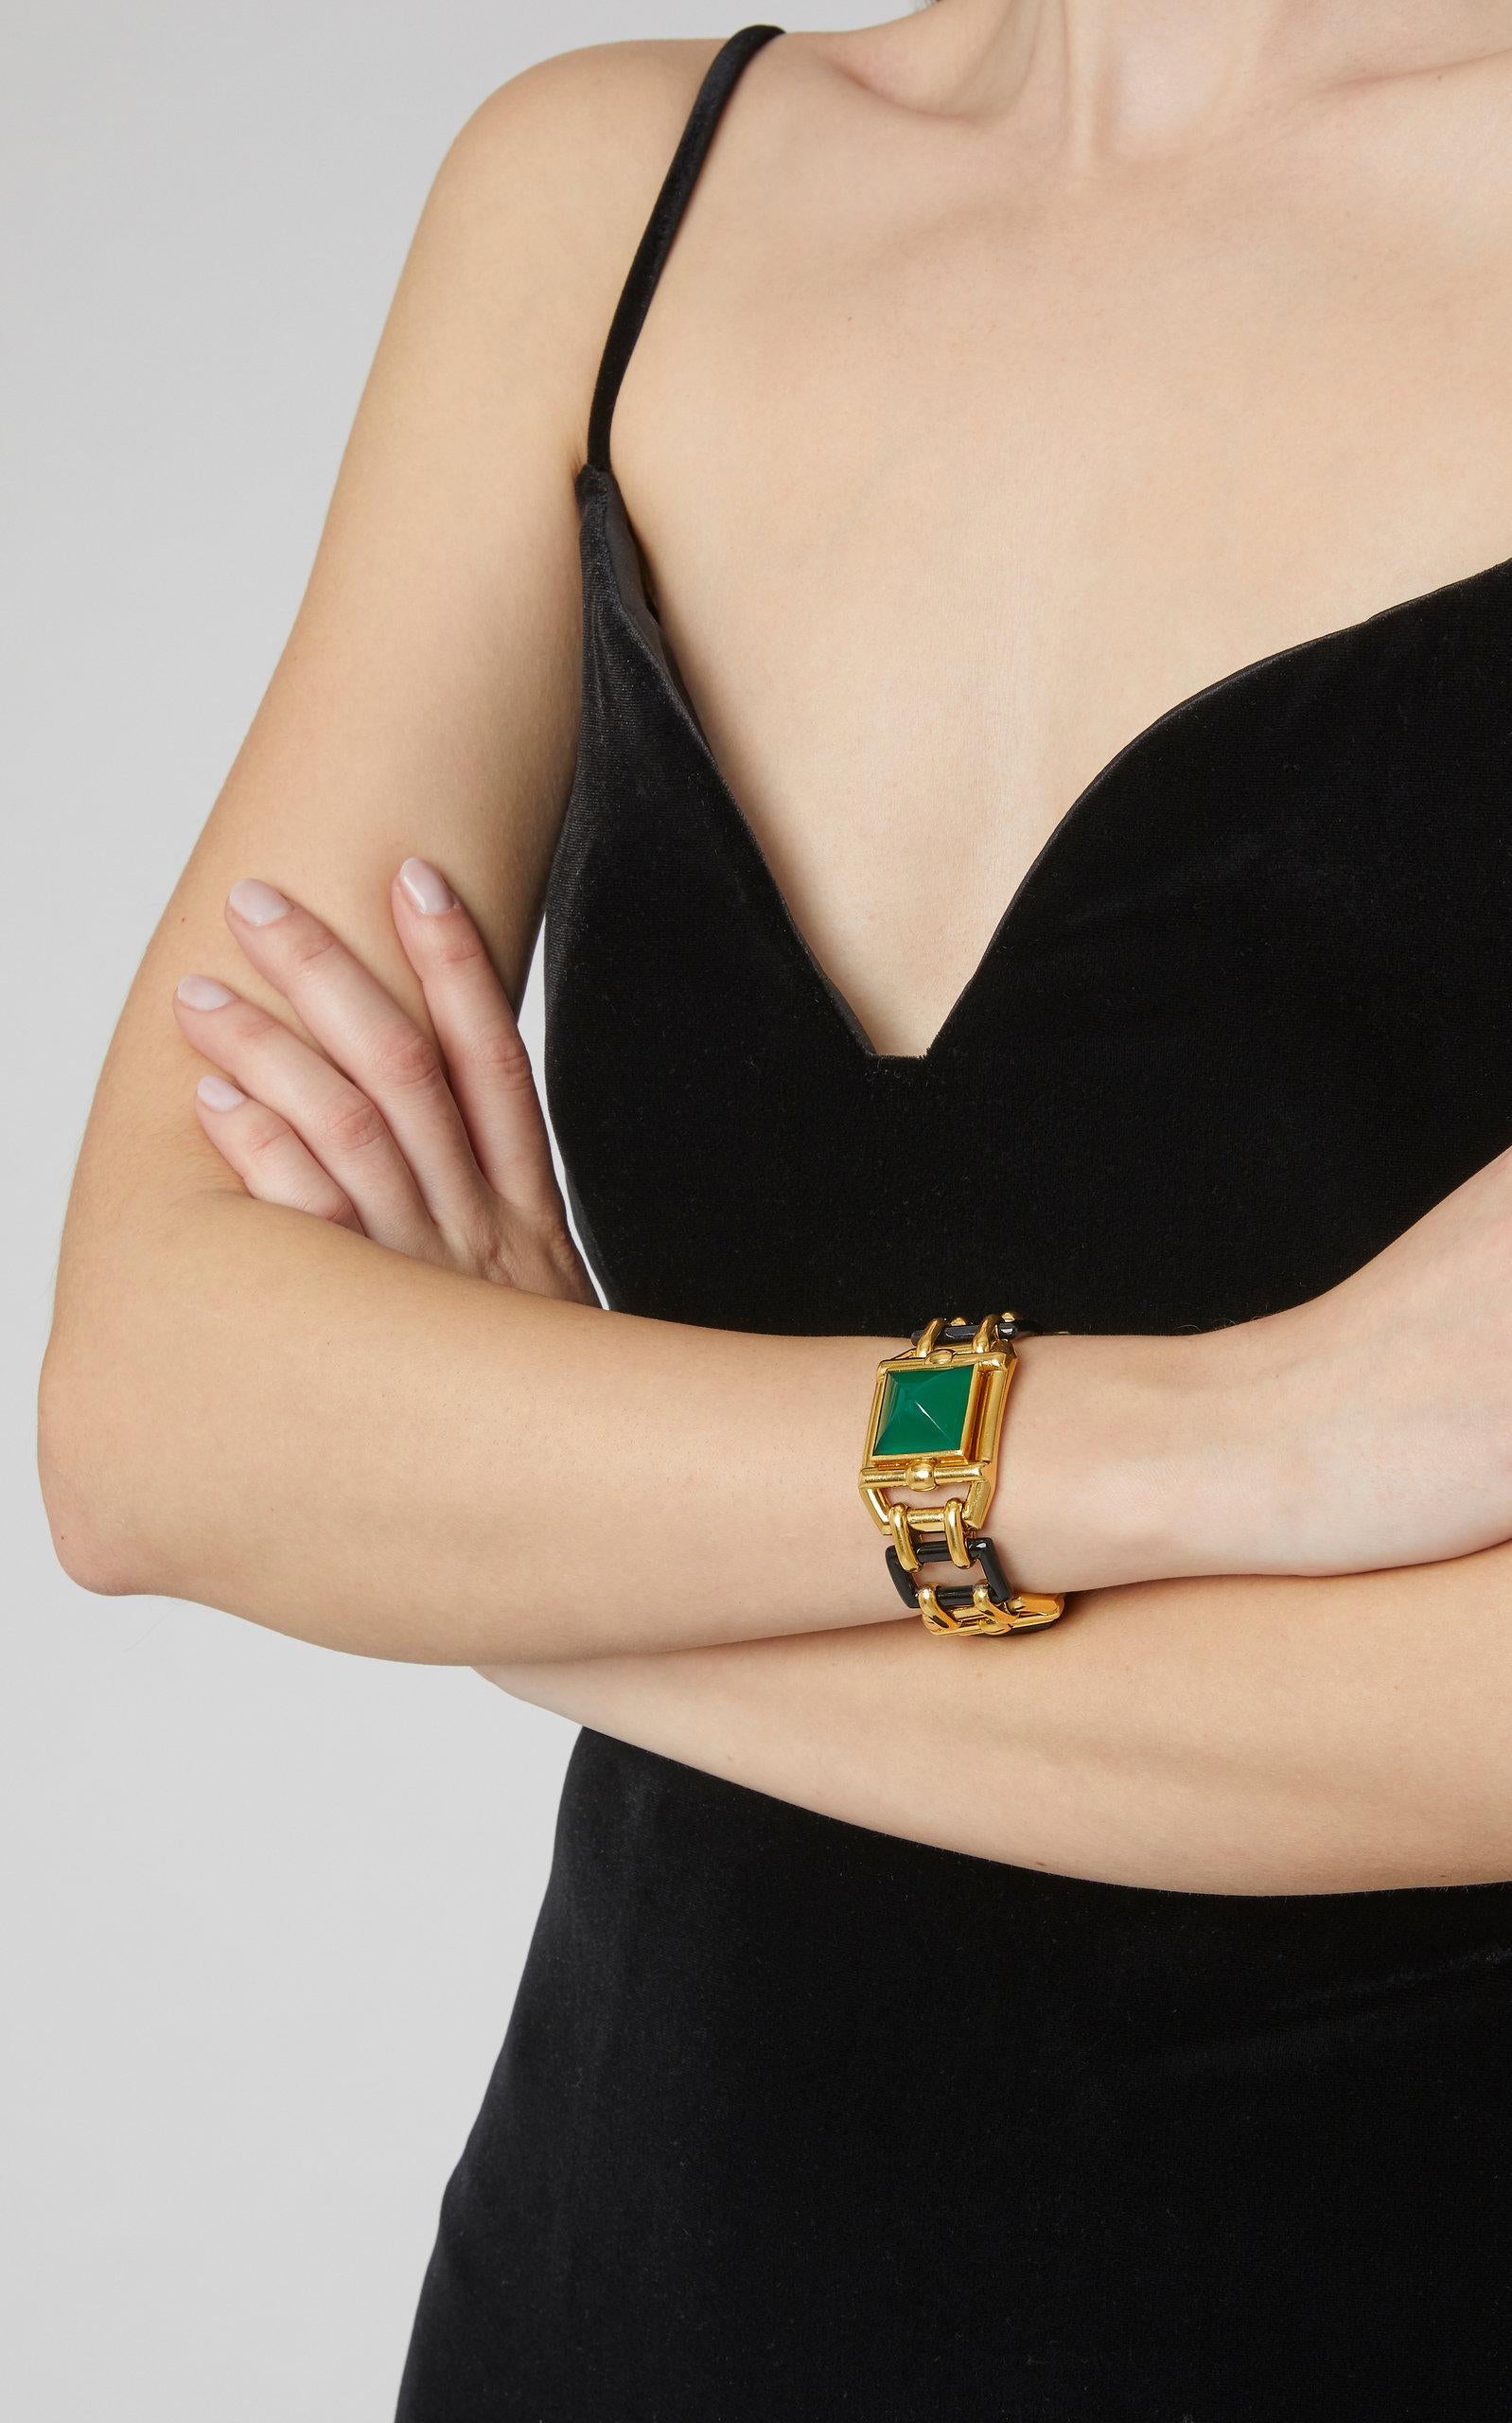 An Art Deco Bracelet by Walser Wald (in its original box) with interlinked elements in chrysophrase, onyx and gold. French Exportation marks, circa 1928.